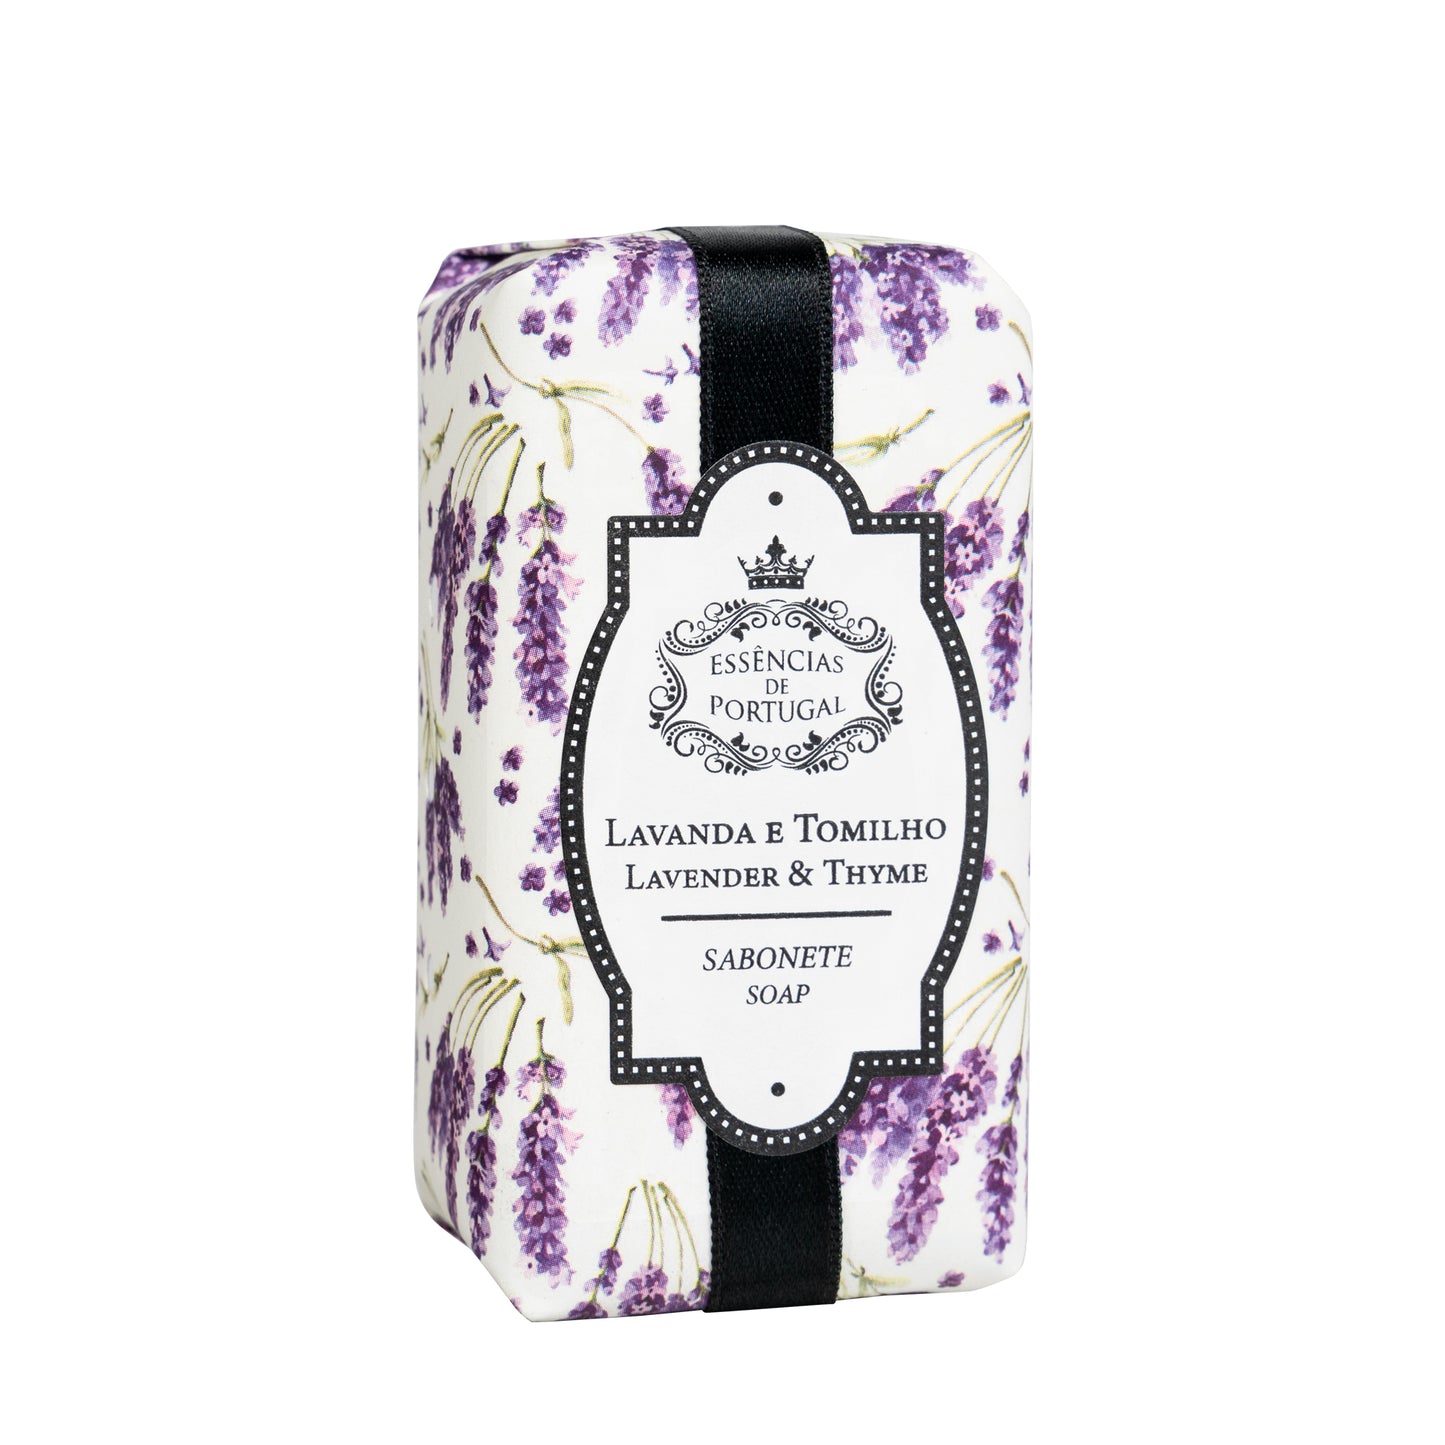 Primary image of Lavender & Thyme Soap